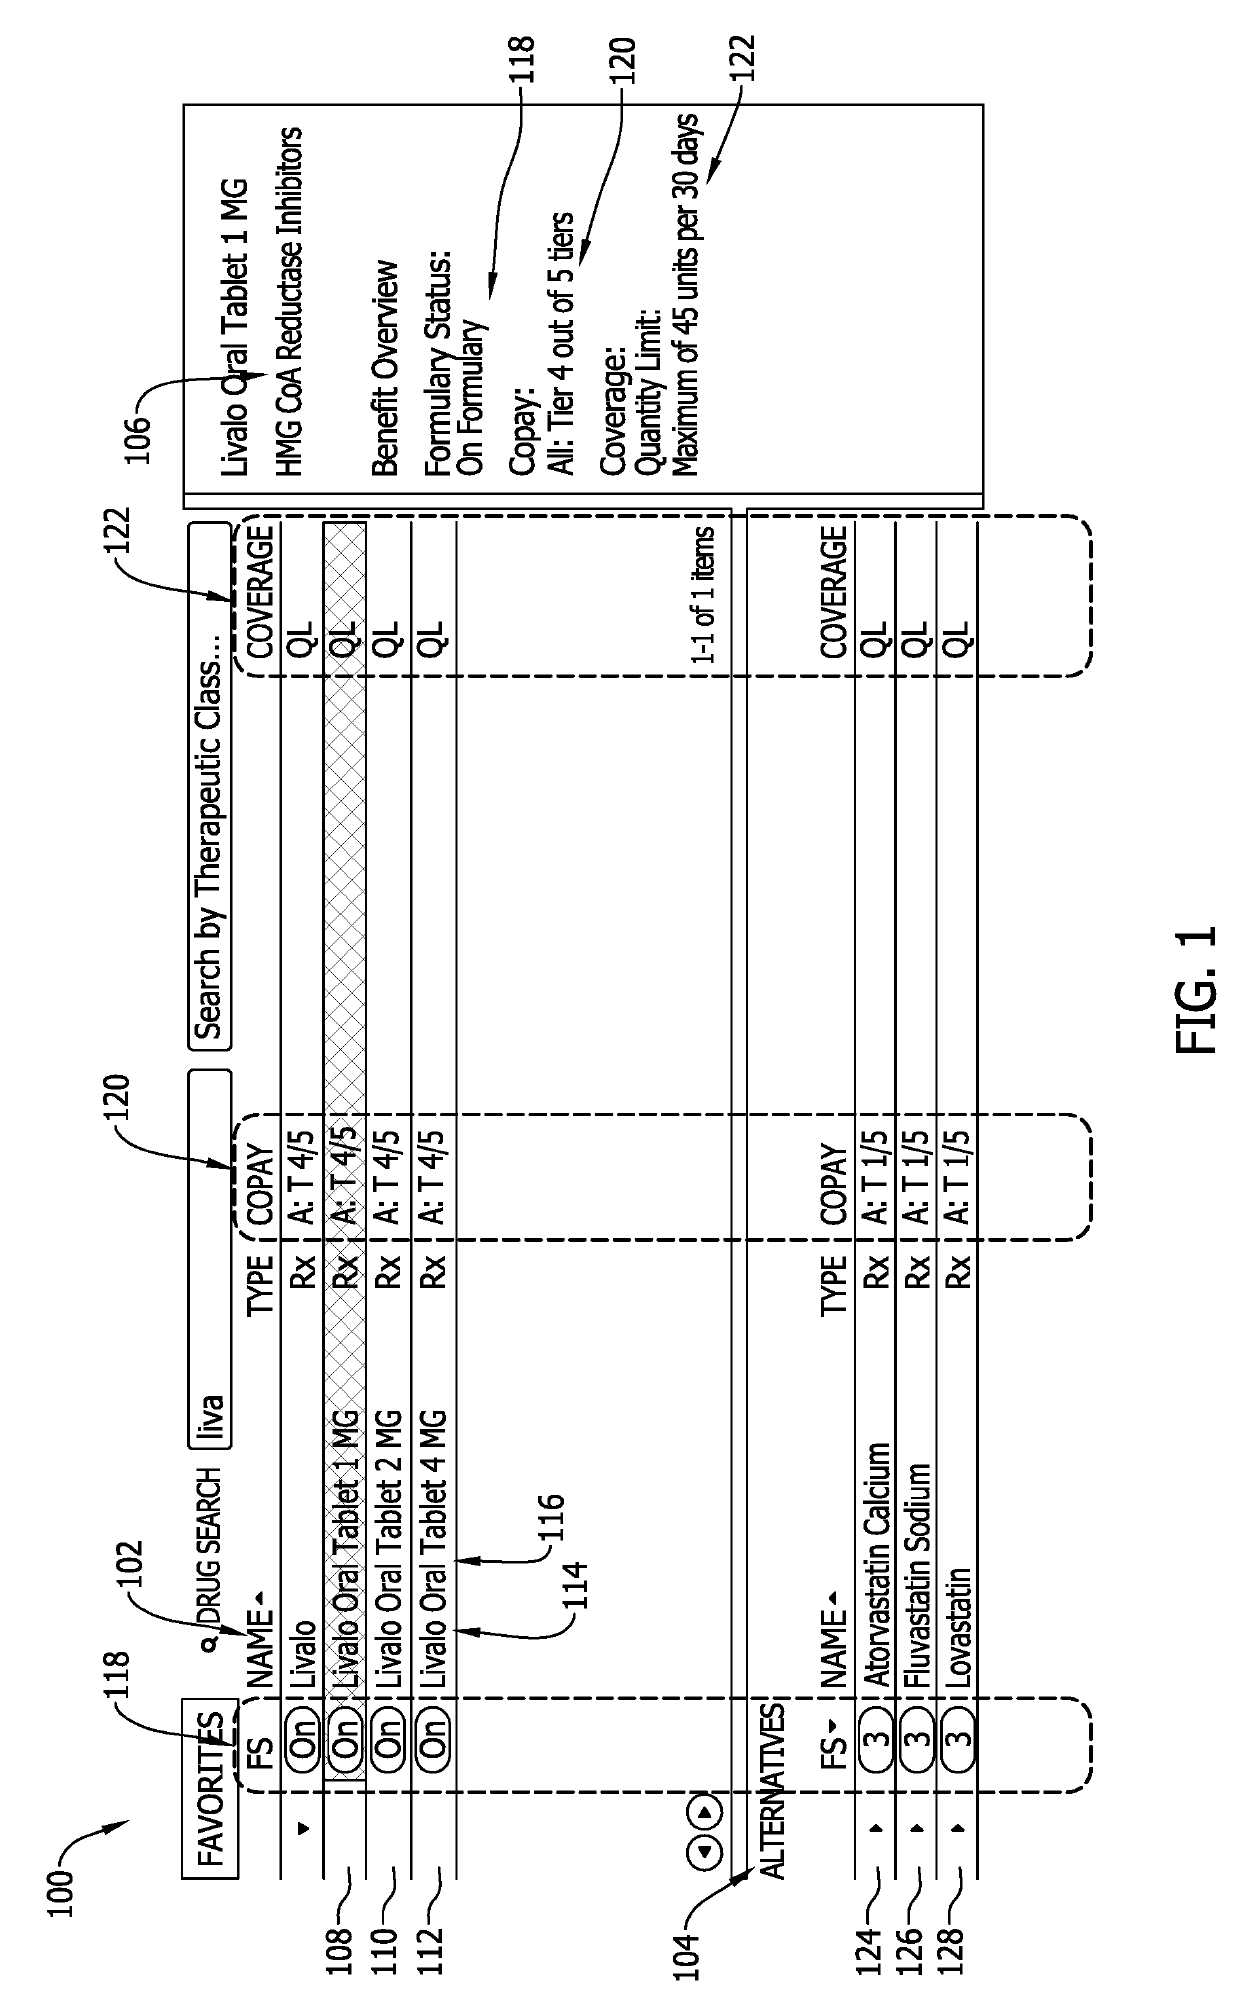 Method of managing prescription medical and pharmaceutical products and medical benefits